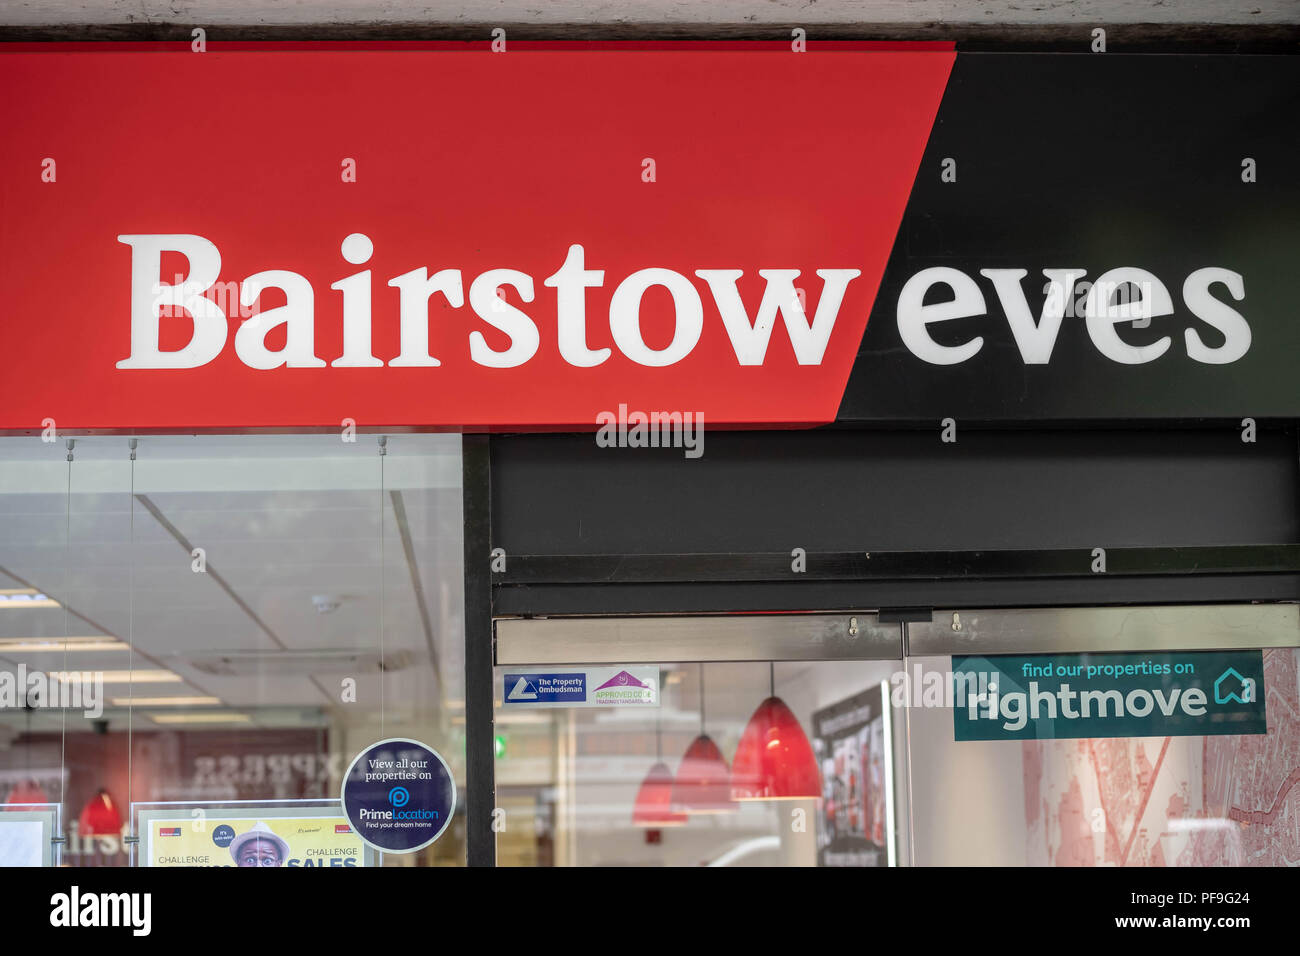 Bairstow Eves (part of the Countrywide plc Group) Estate agents shop signage in Brentwood Essex Stock Photo